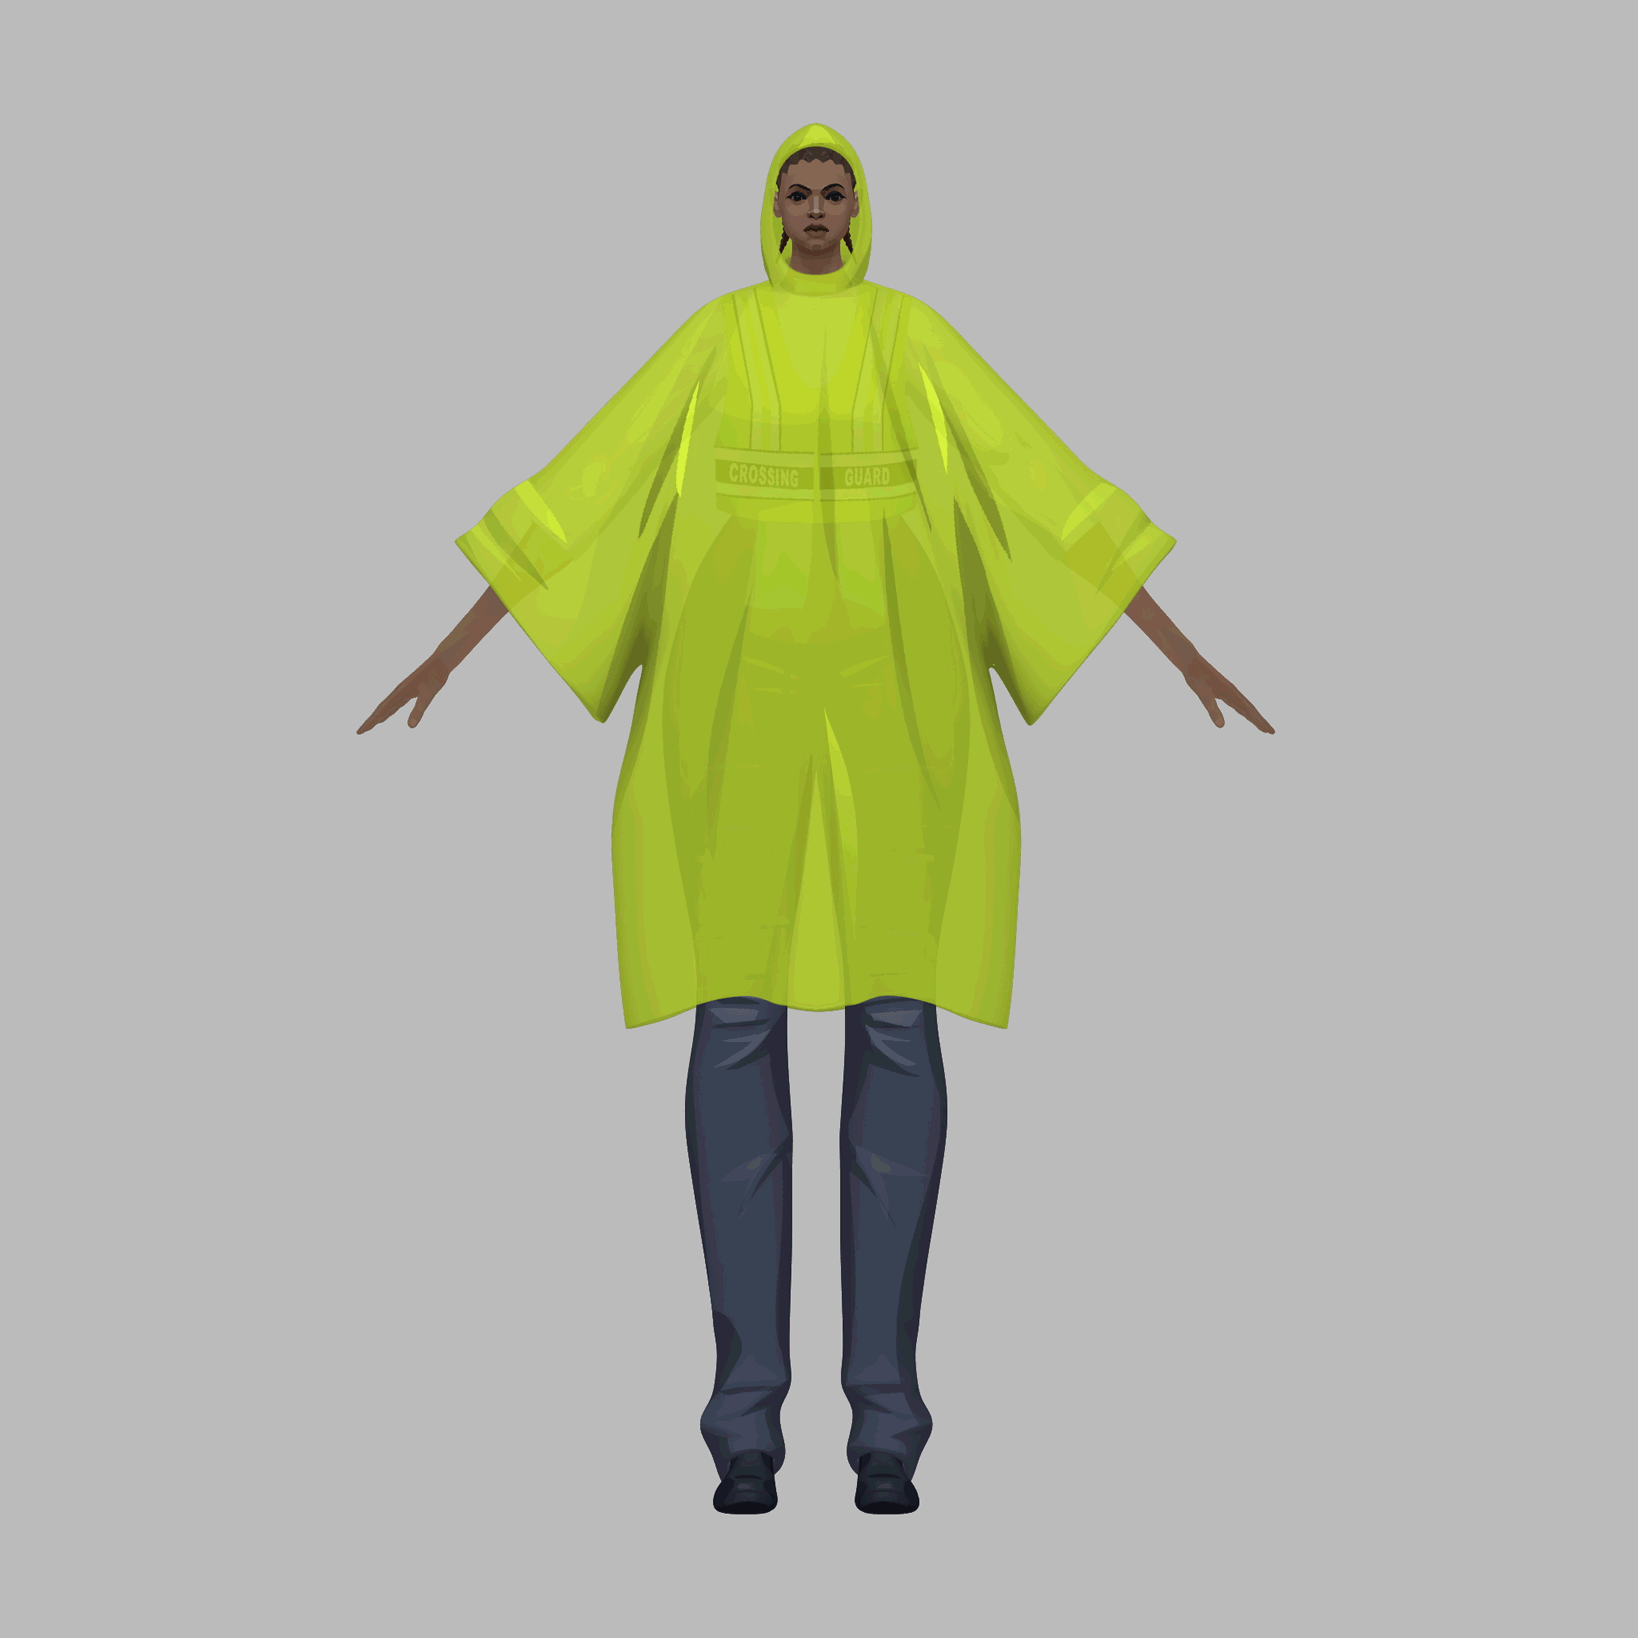 Textured model turntable of Leilani with her rain poncho